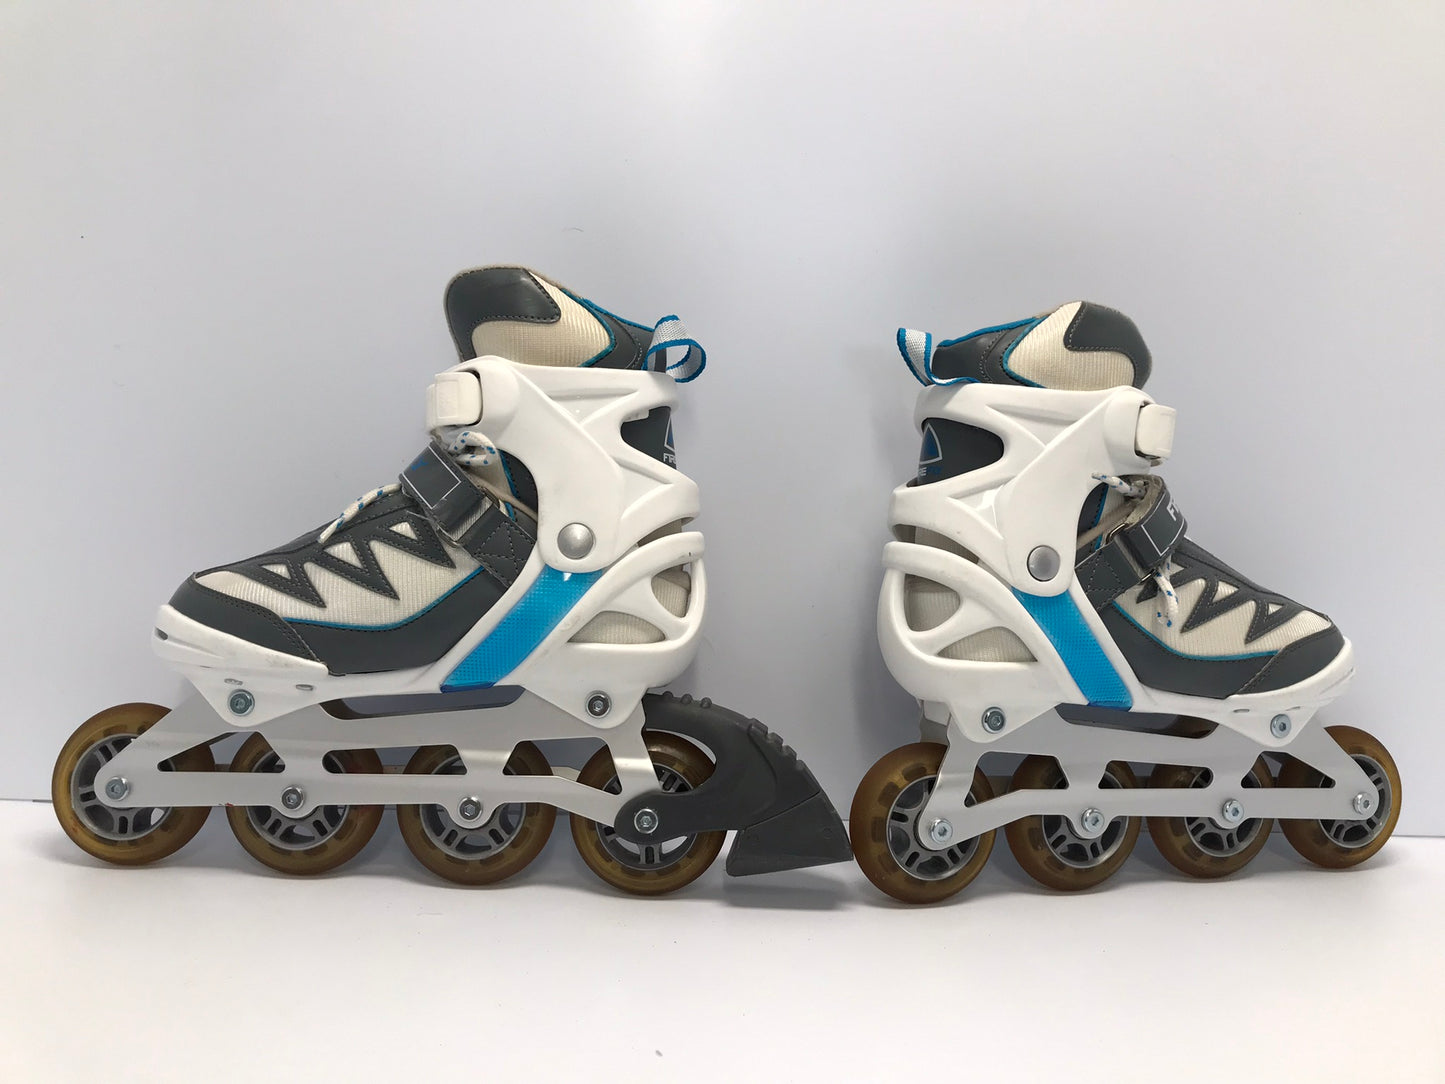 Inline Roller Skates Ladies Size 6 FireFly White Blue Grey As New Rubber Wheels